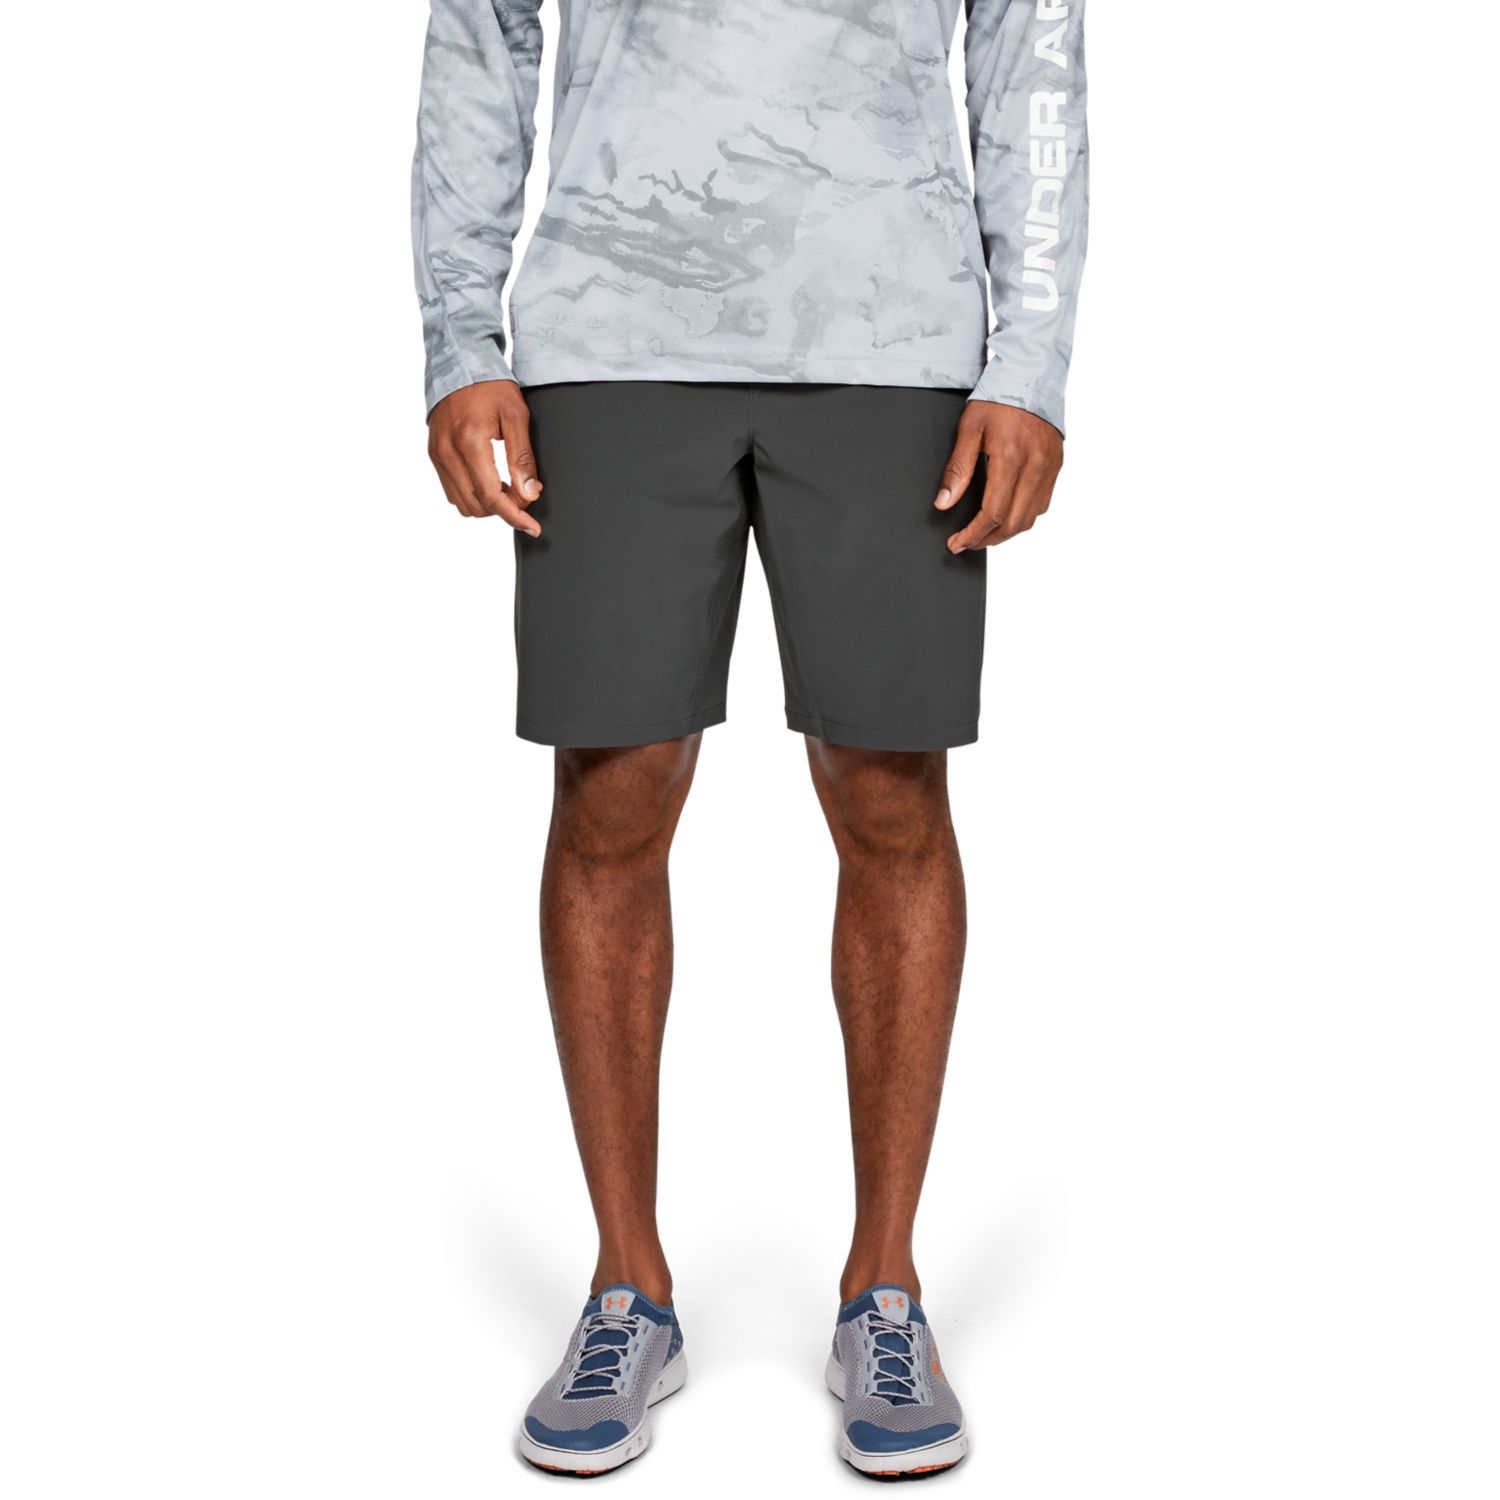 Under Armour Mantra Performance Shorts